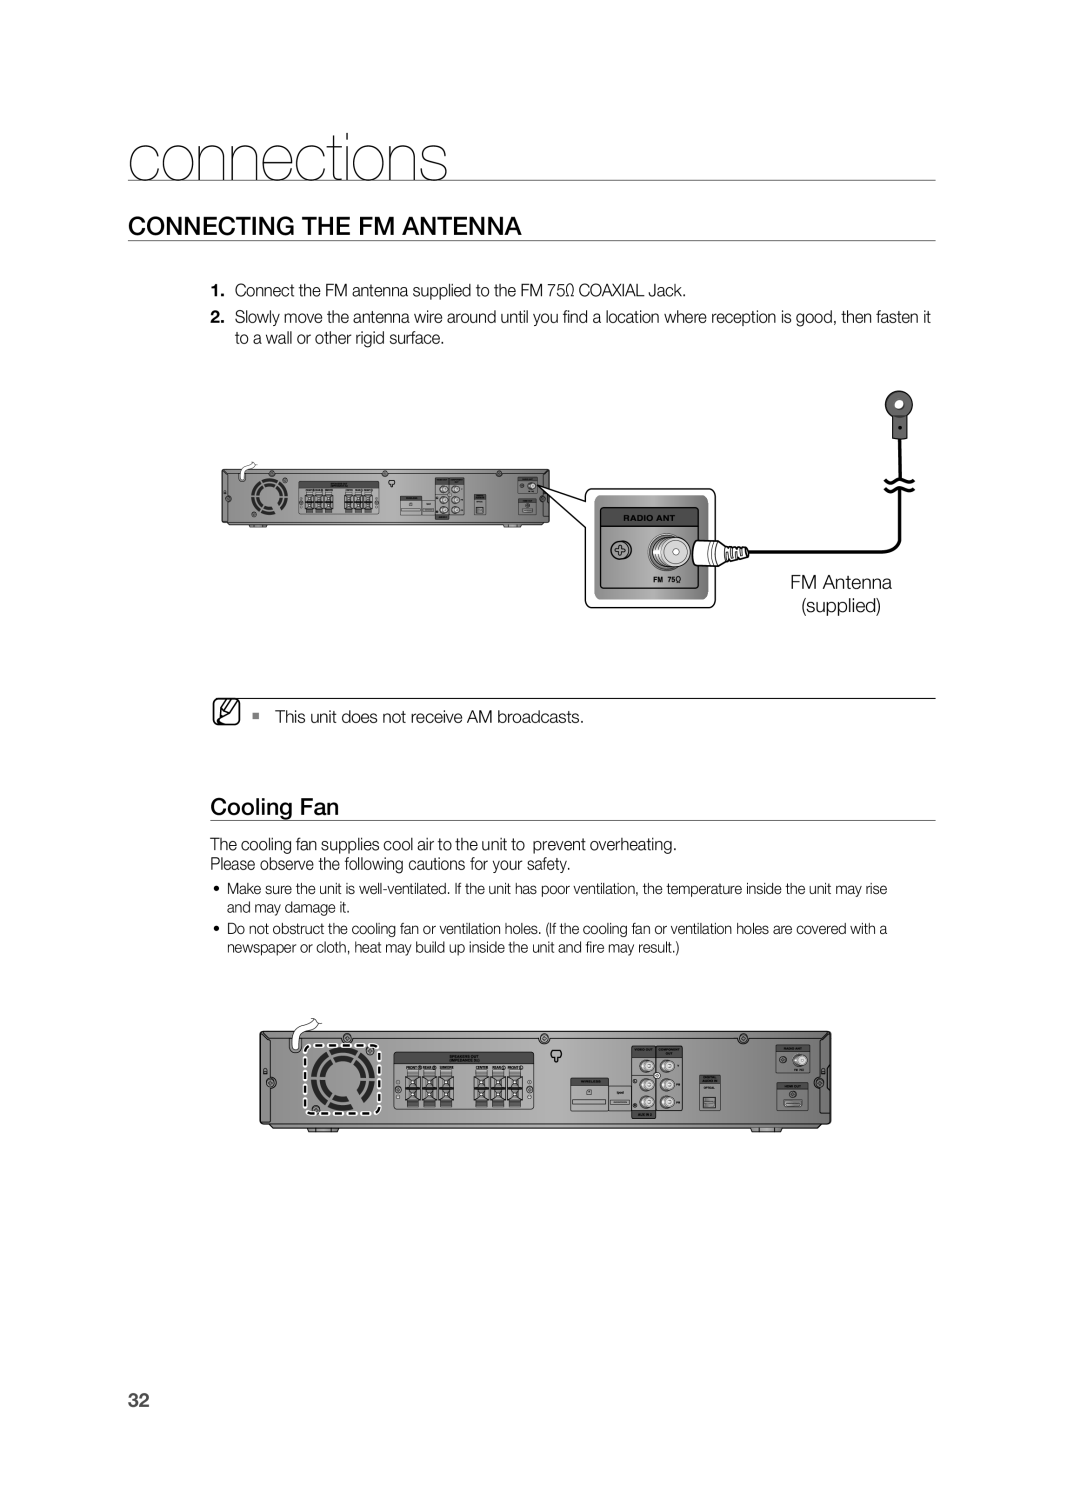 Samsung HT-TWZ415 user manual Connecting the FM Antenna, connections, Cooling Fan 